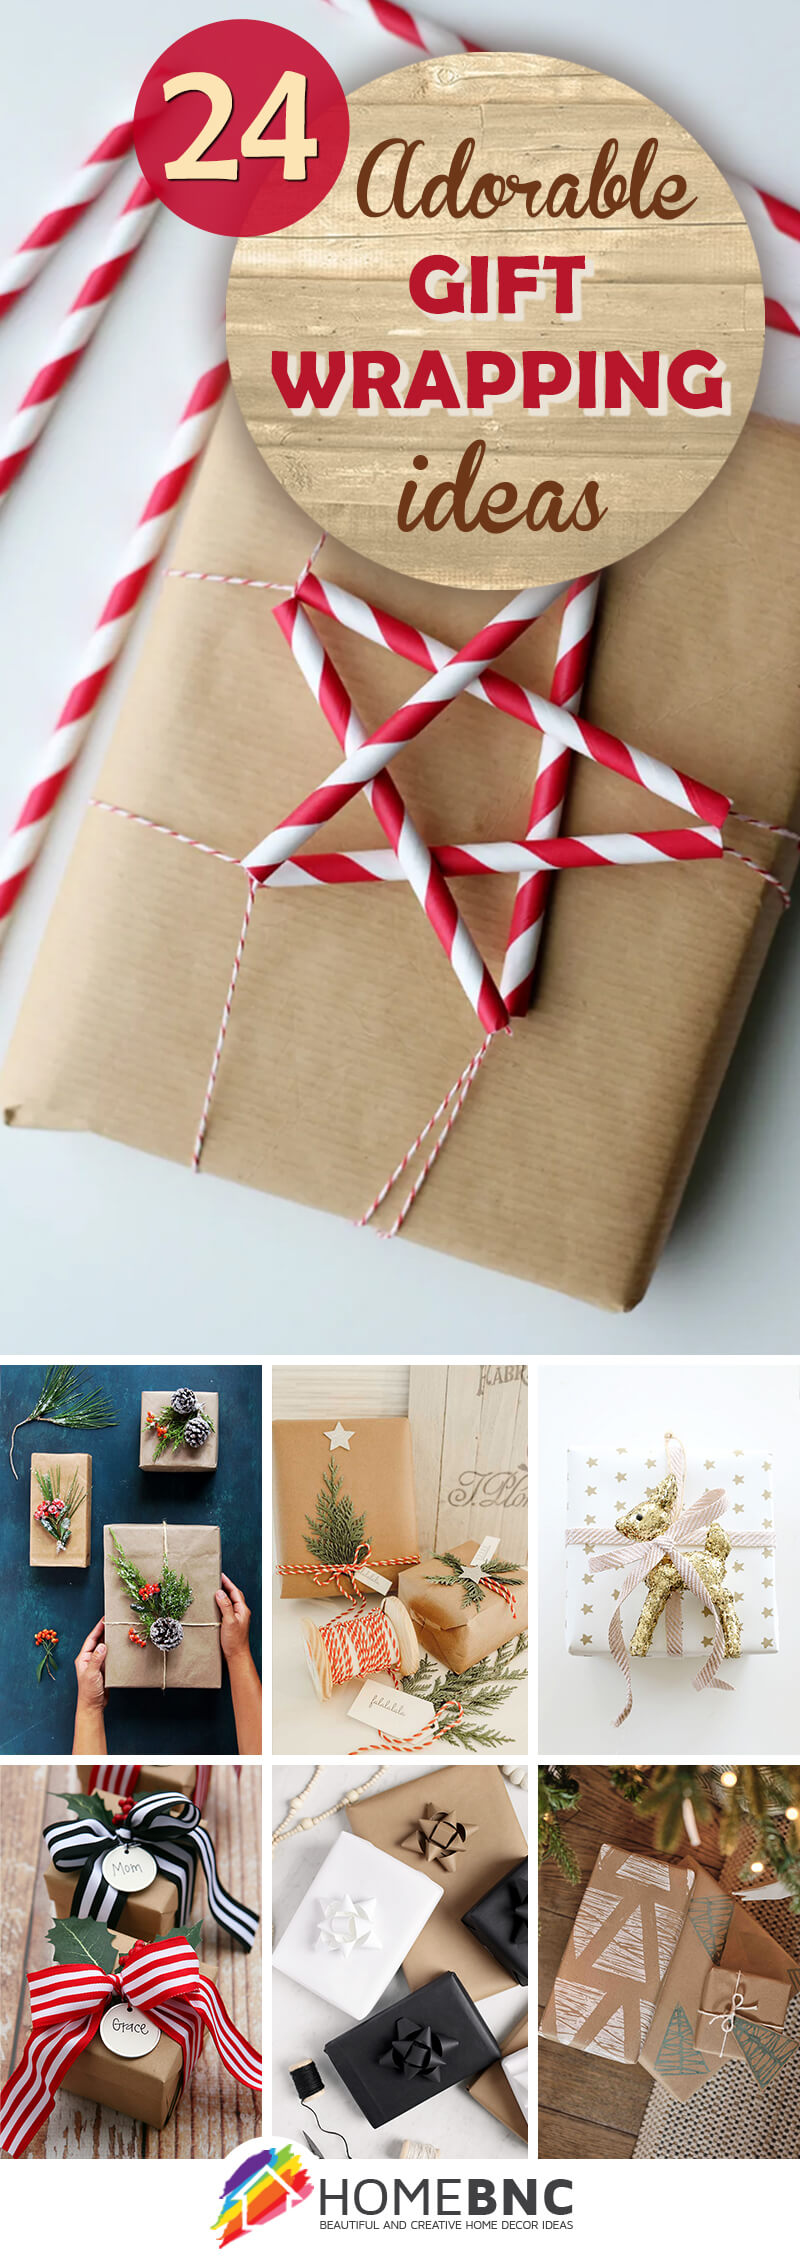 13 Expert Tips for Wrapping the Perfect Present | Mental Floss